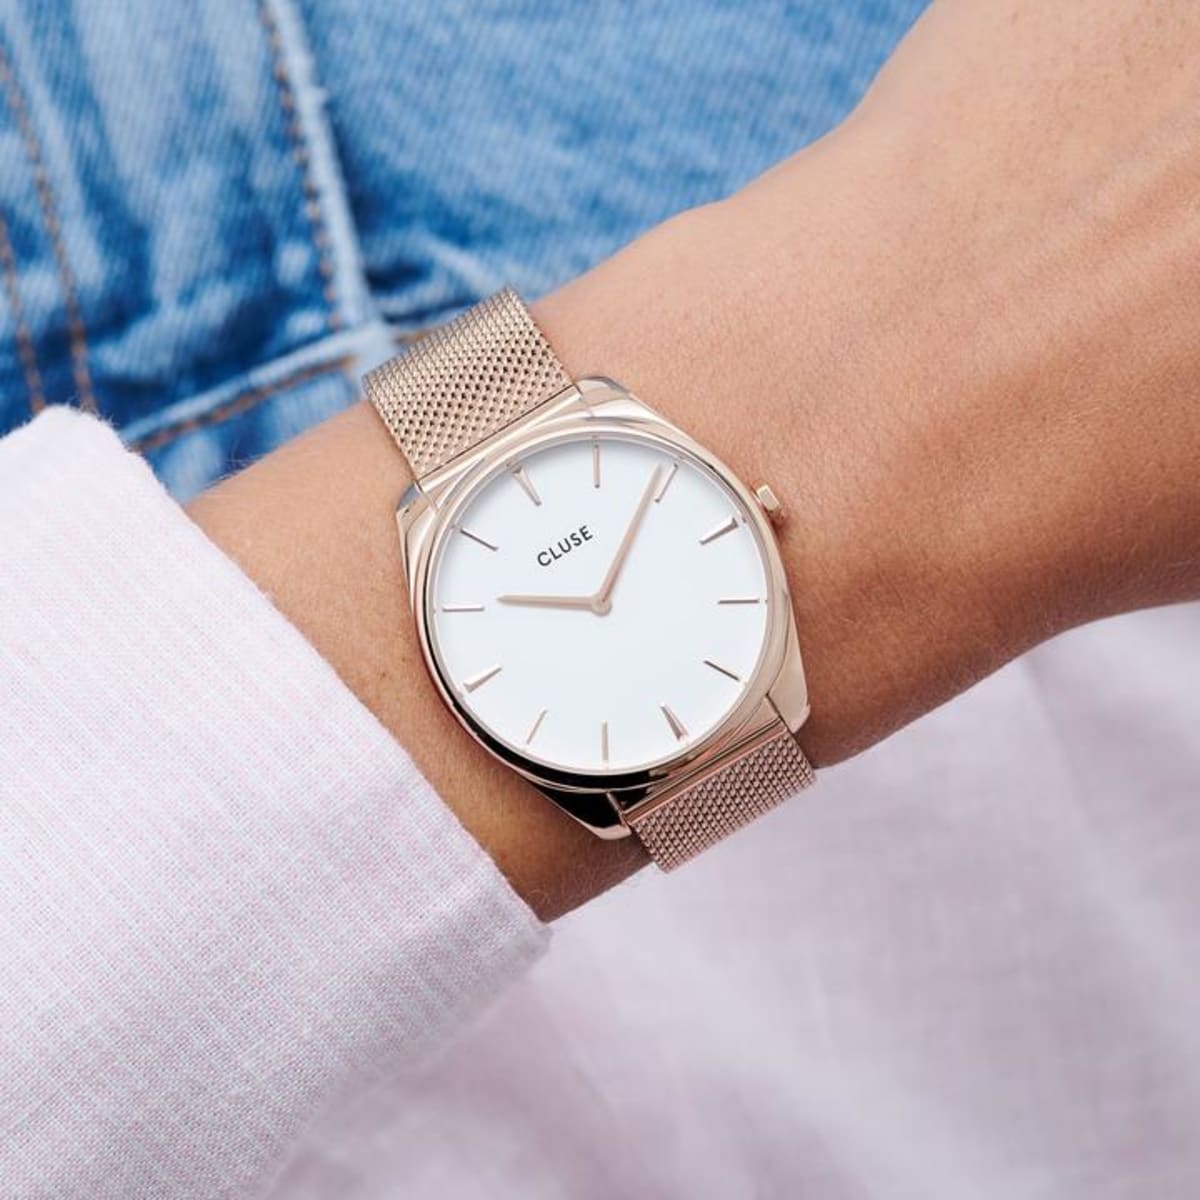 If you like to blur the lines between minimalism and glamour, this CLUSE Féroce watch offers you the best of both worlds. It's a true classic. An ode to our love for minimalism and joie de vivre. Its 36 mm case is refined but pronounced: a perfect companion for the mid-sized wrist. The matte white dial blends perfectly with the rose gold coloured case and mesh strap. You can easily interchange the strap of this Féroce model with any 18 mm CLUSE watch strap.